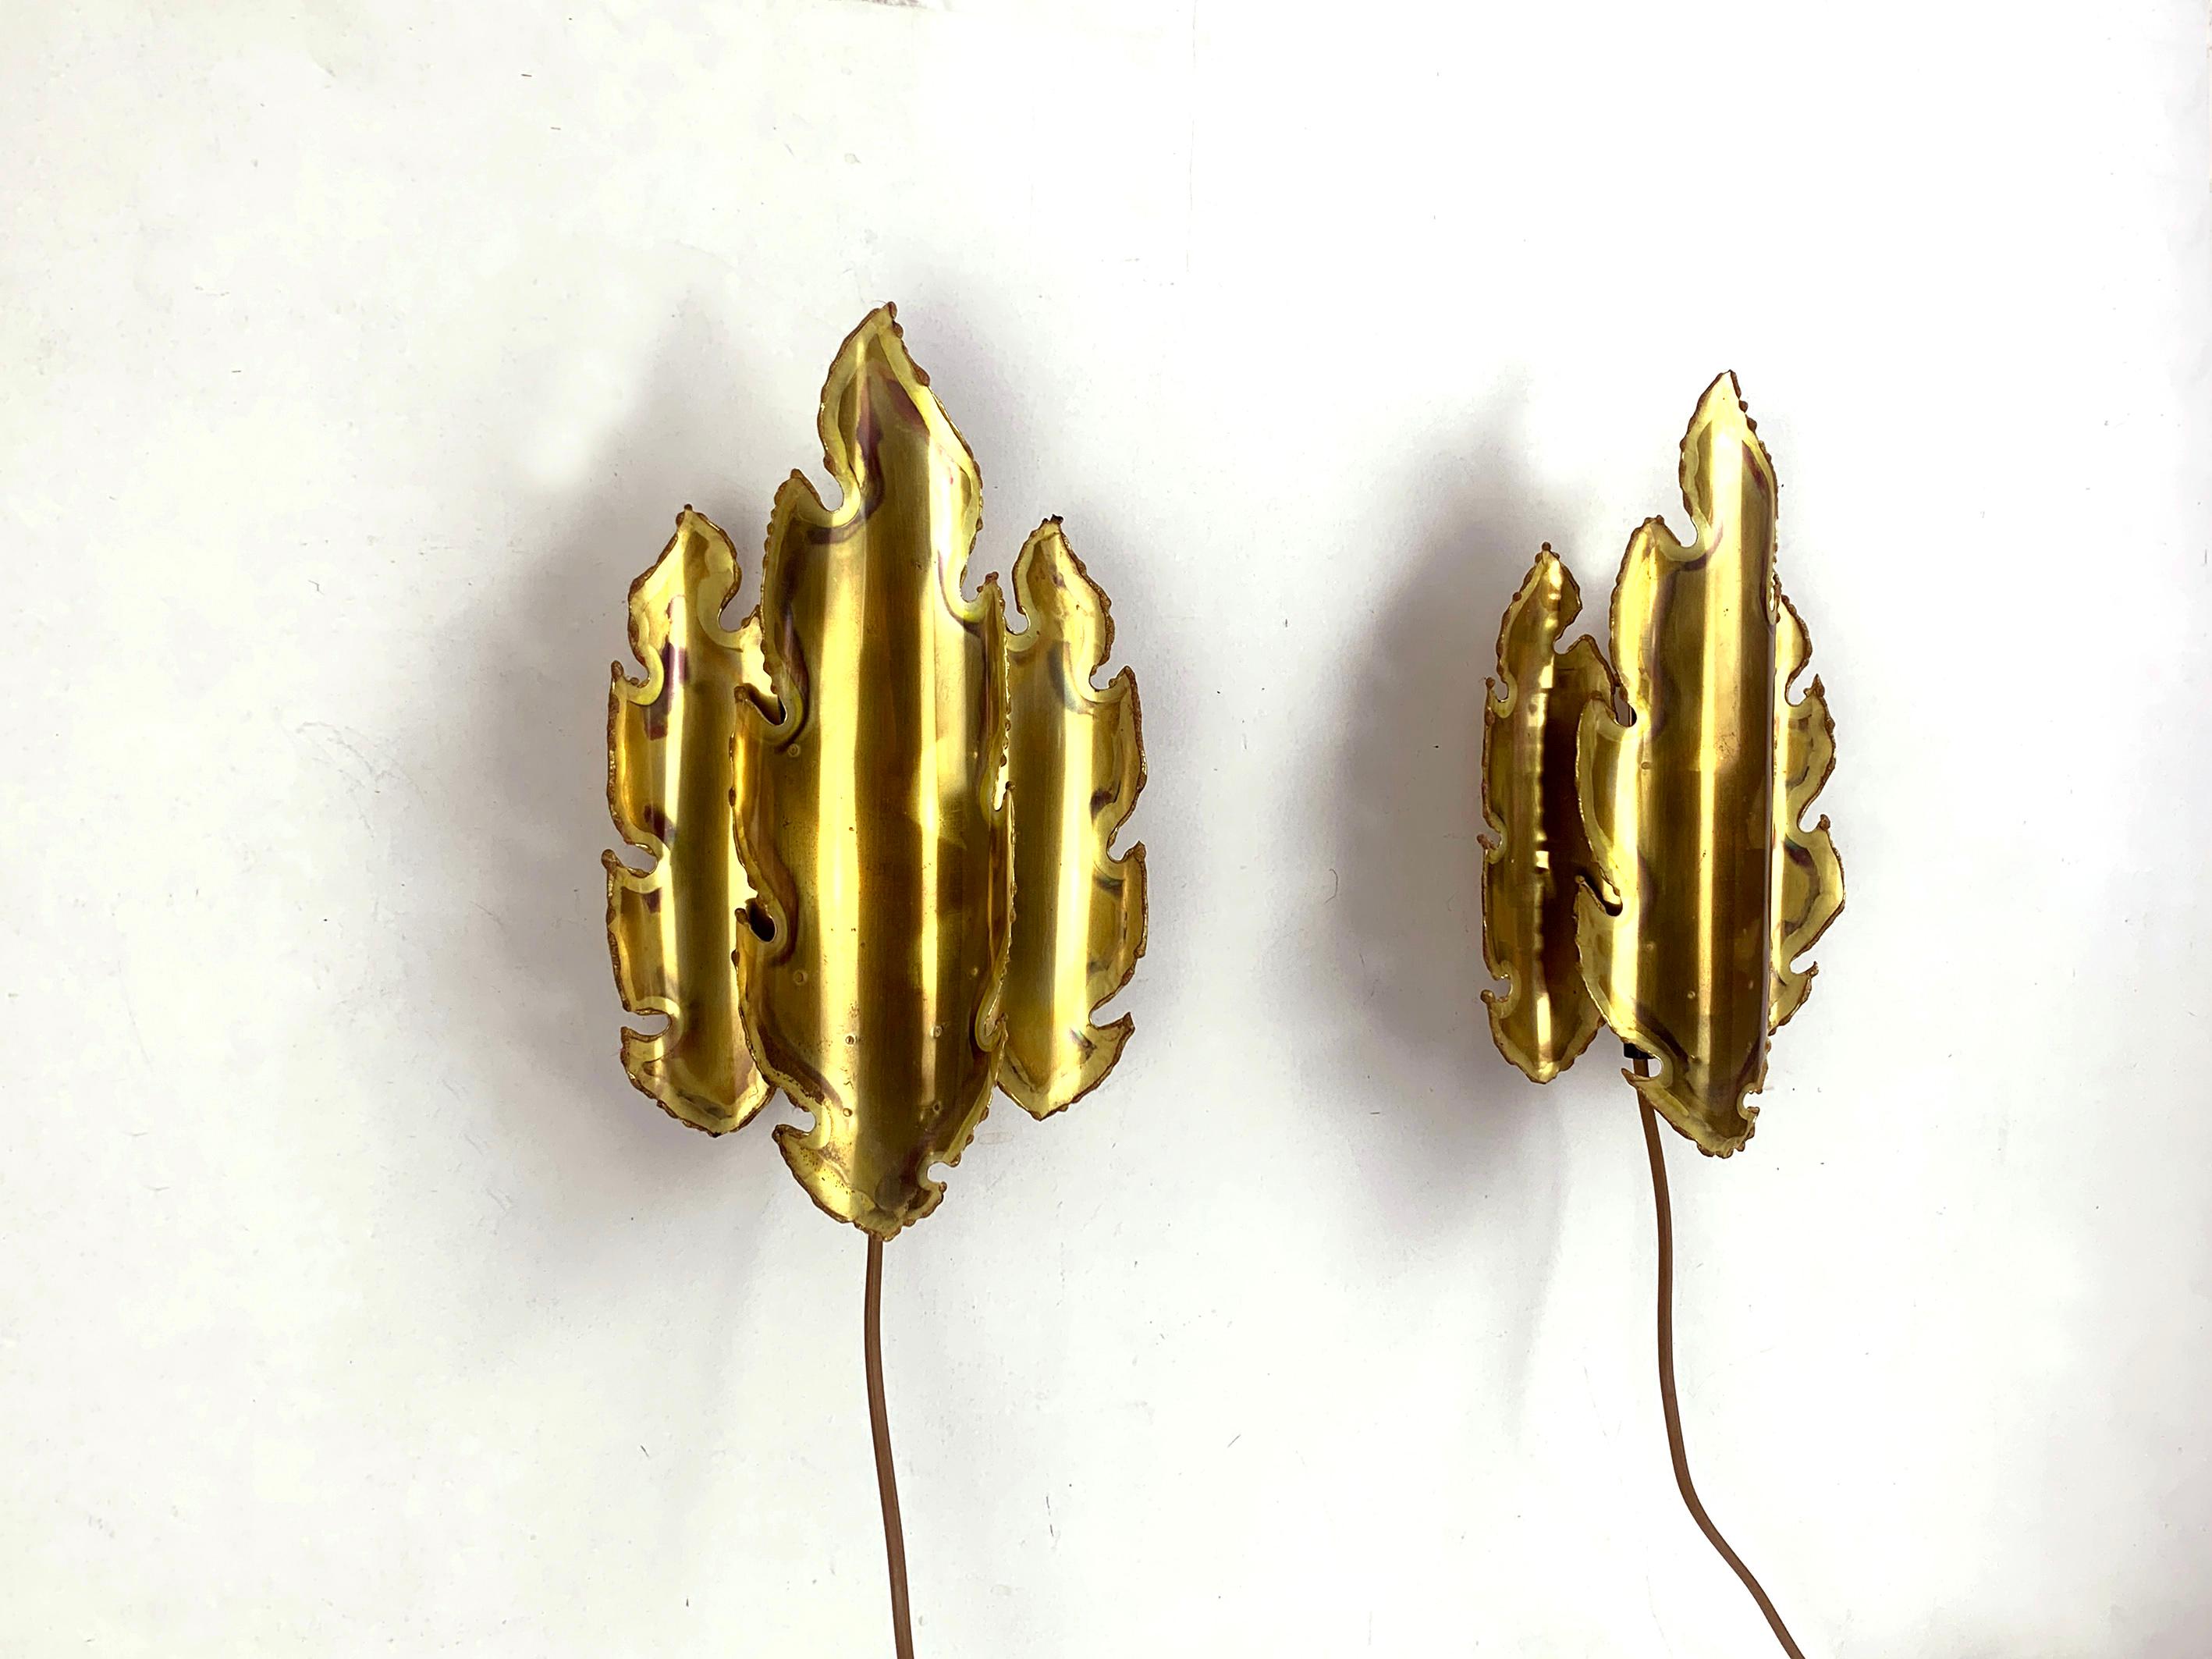 Vintage Sconces in Brutalist Style, labelled. 
Design by Svend Aage Holm Sørensen, for Holm Sørensen, Denmark. 
Made of Brass, Acid Tainted and Cut by Hand.

Svend Aage Holm Sørensen (1913-2004) was a danish designer. He is known for his